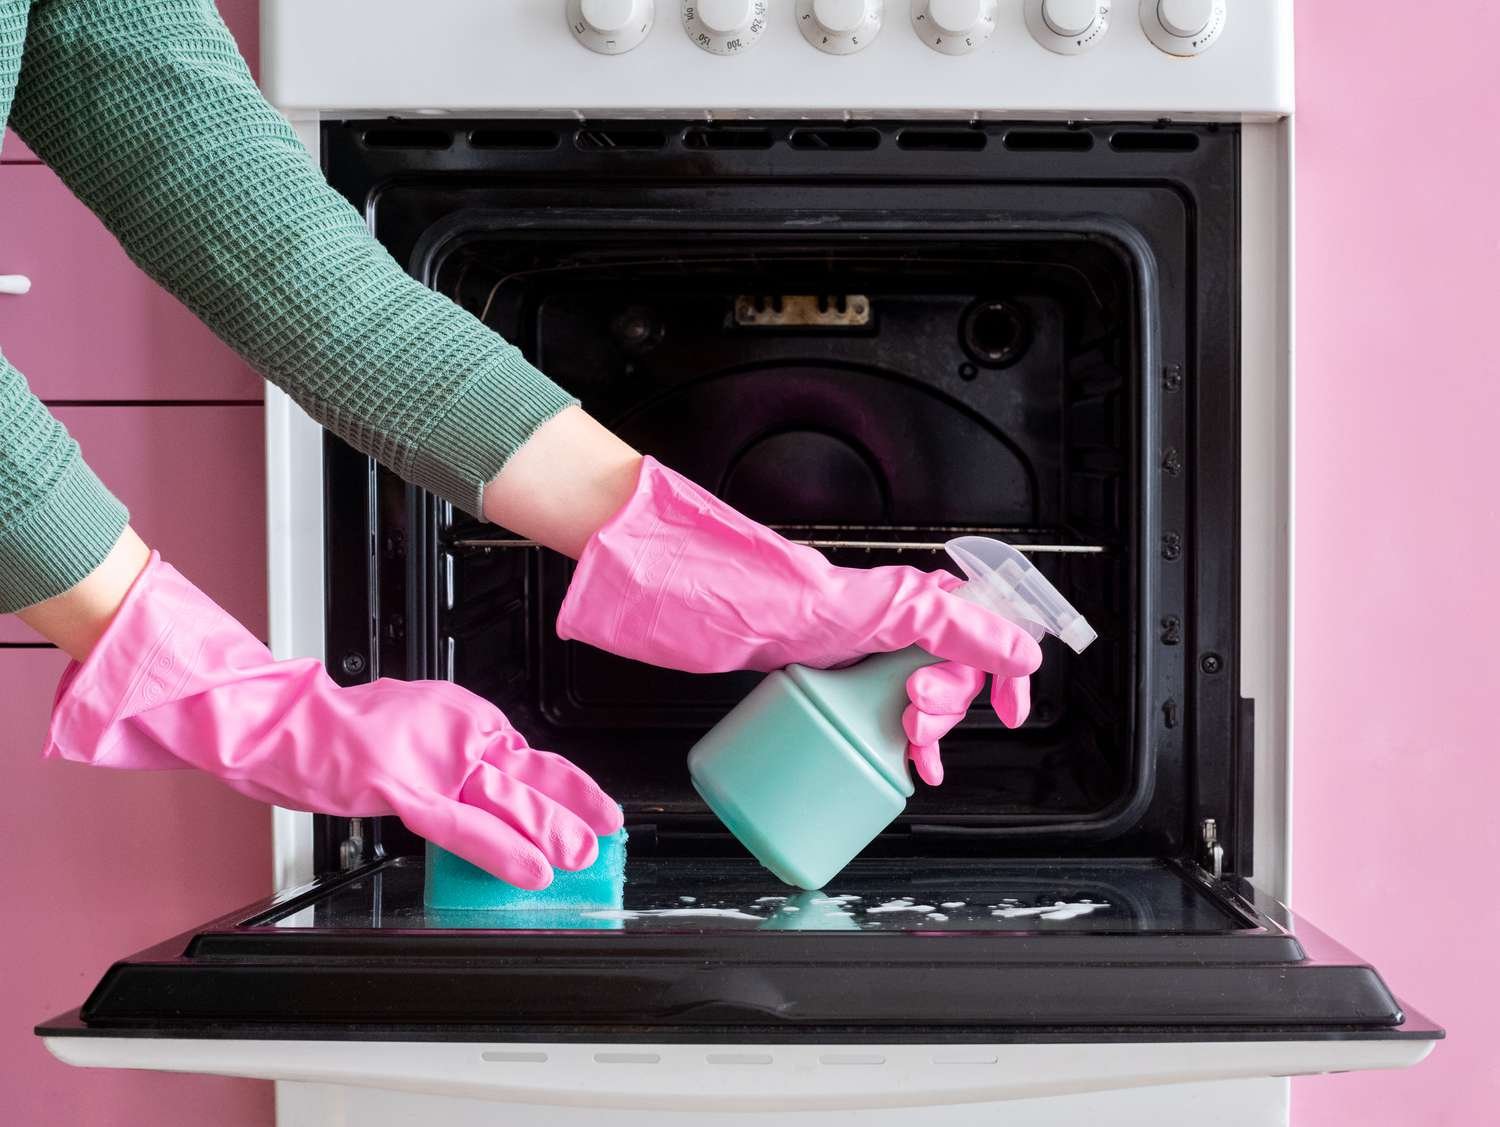 10 Simple Tricks for Cleaning Kitchen Appliances